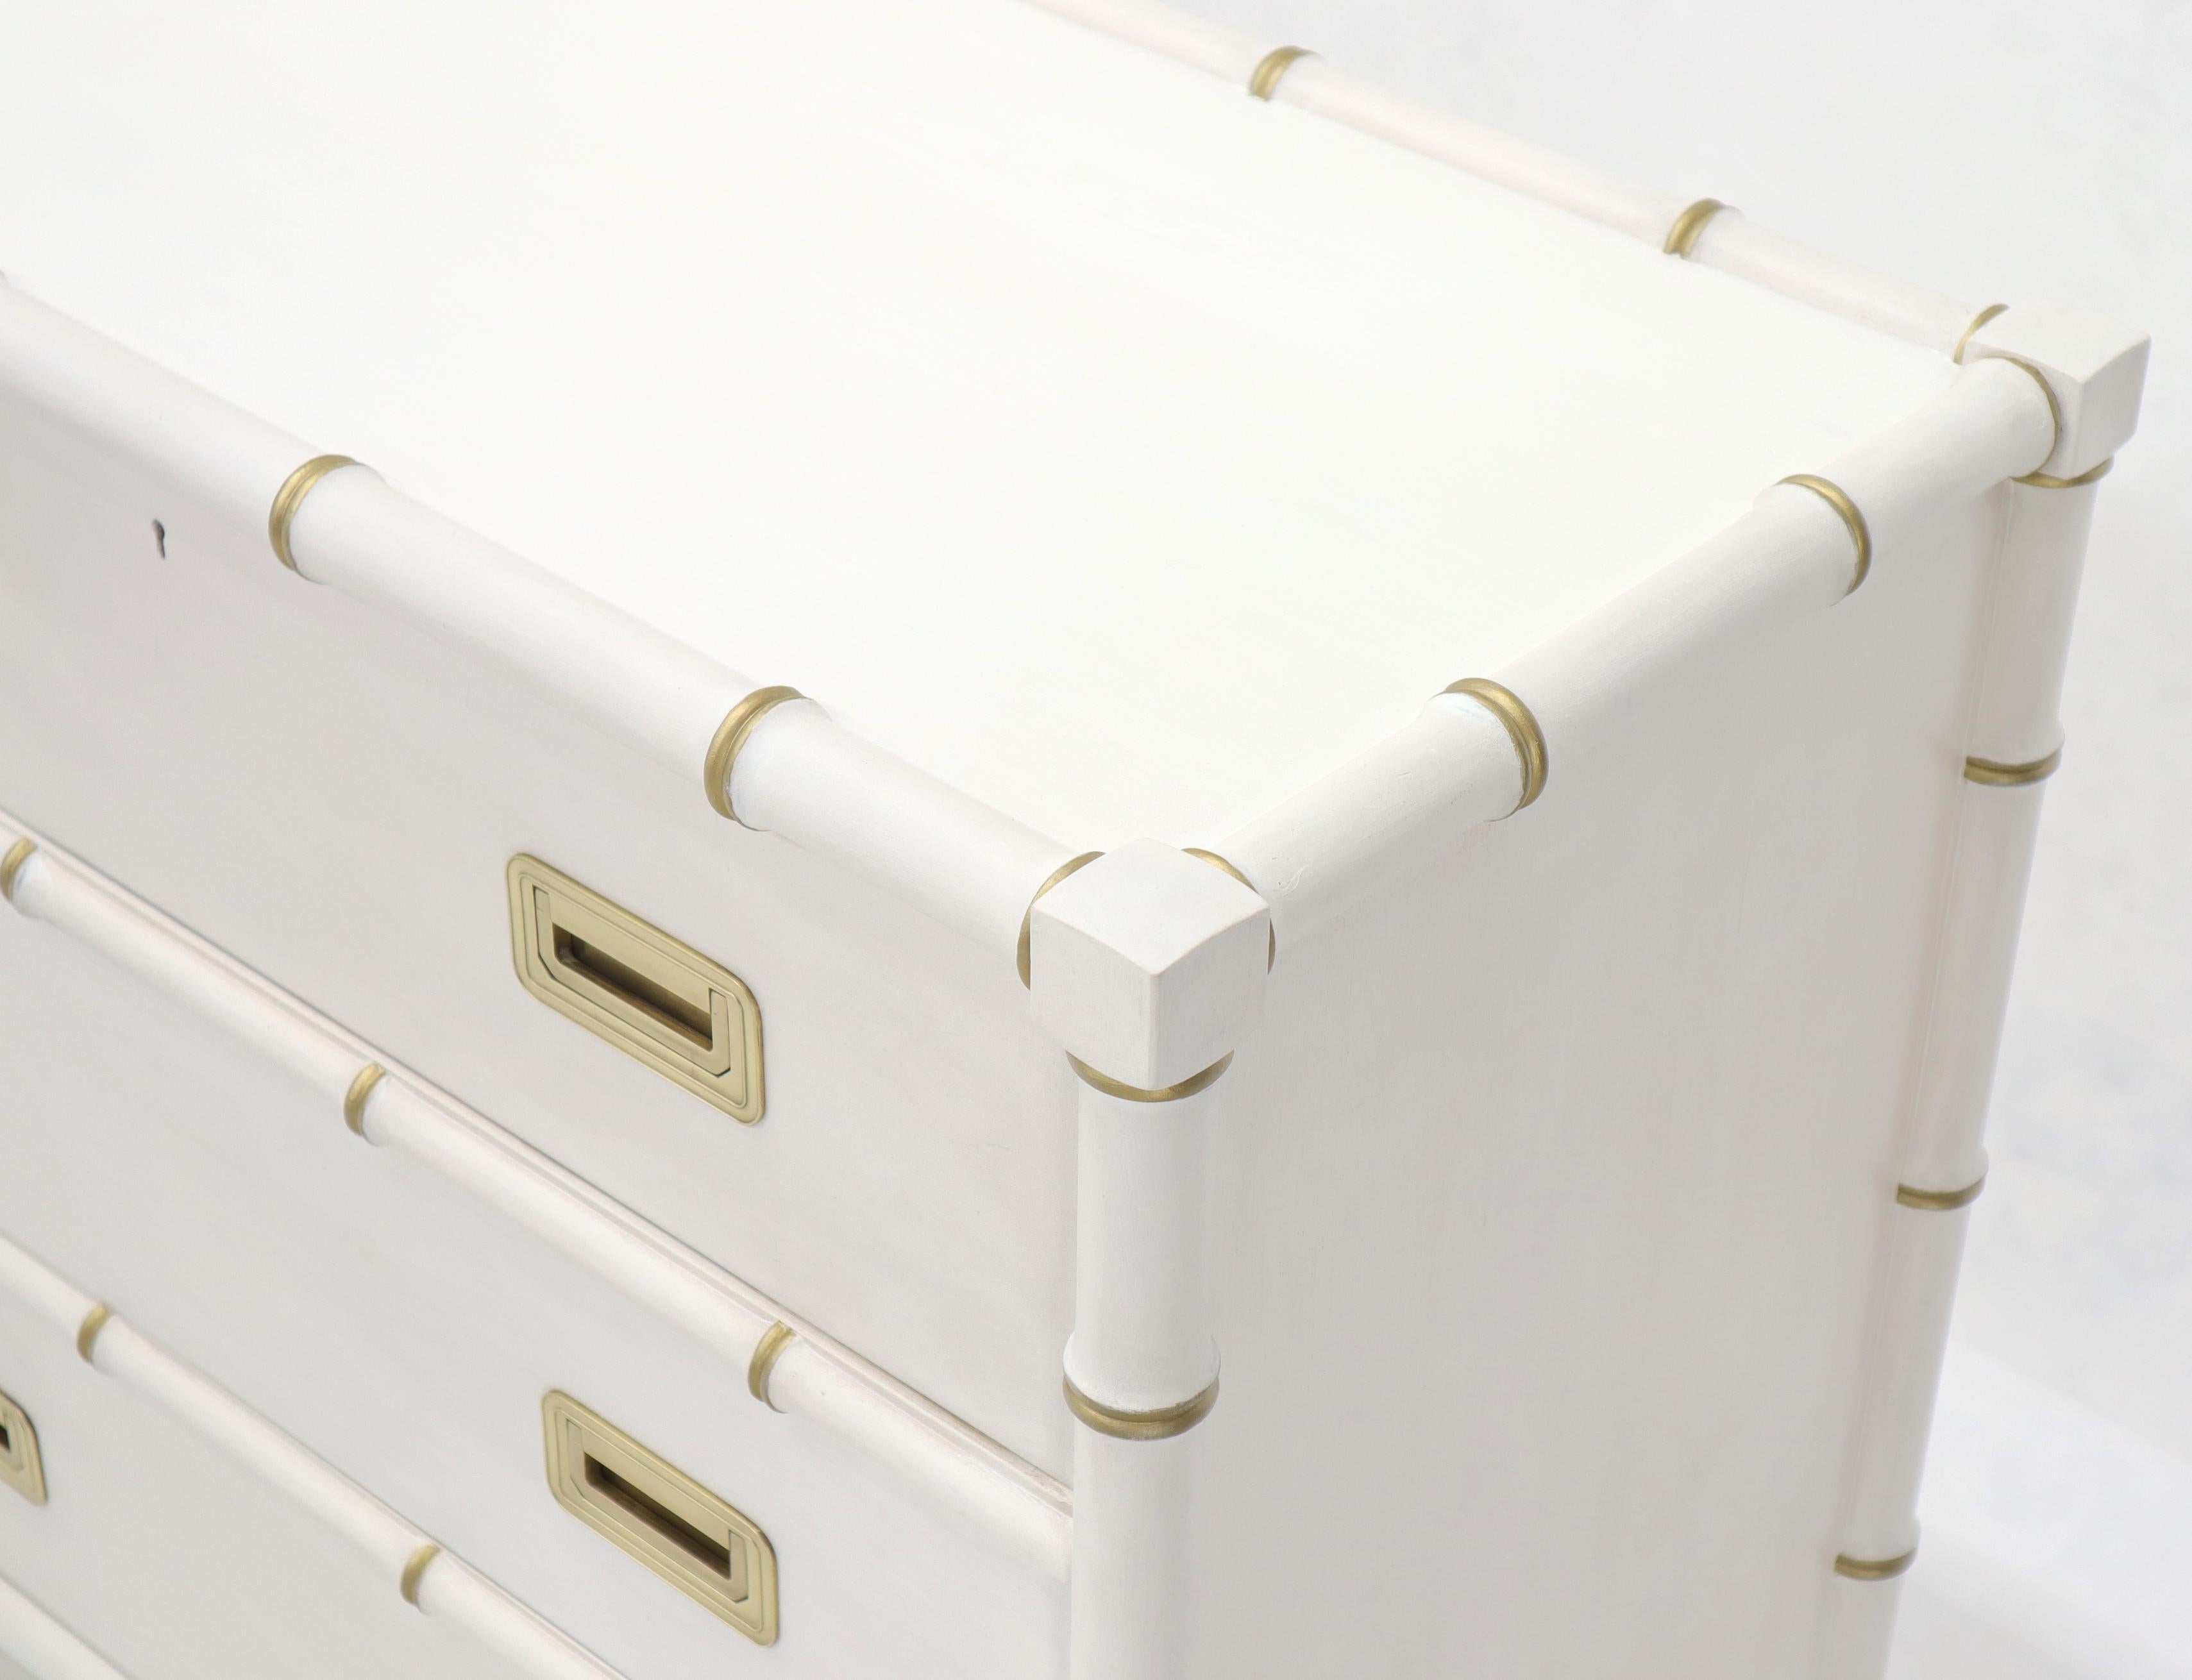 Pair of White Lacquer Brass Hardware Bachelor Chest with Suspended Brass Vanity For Sale 7